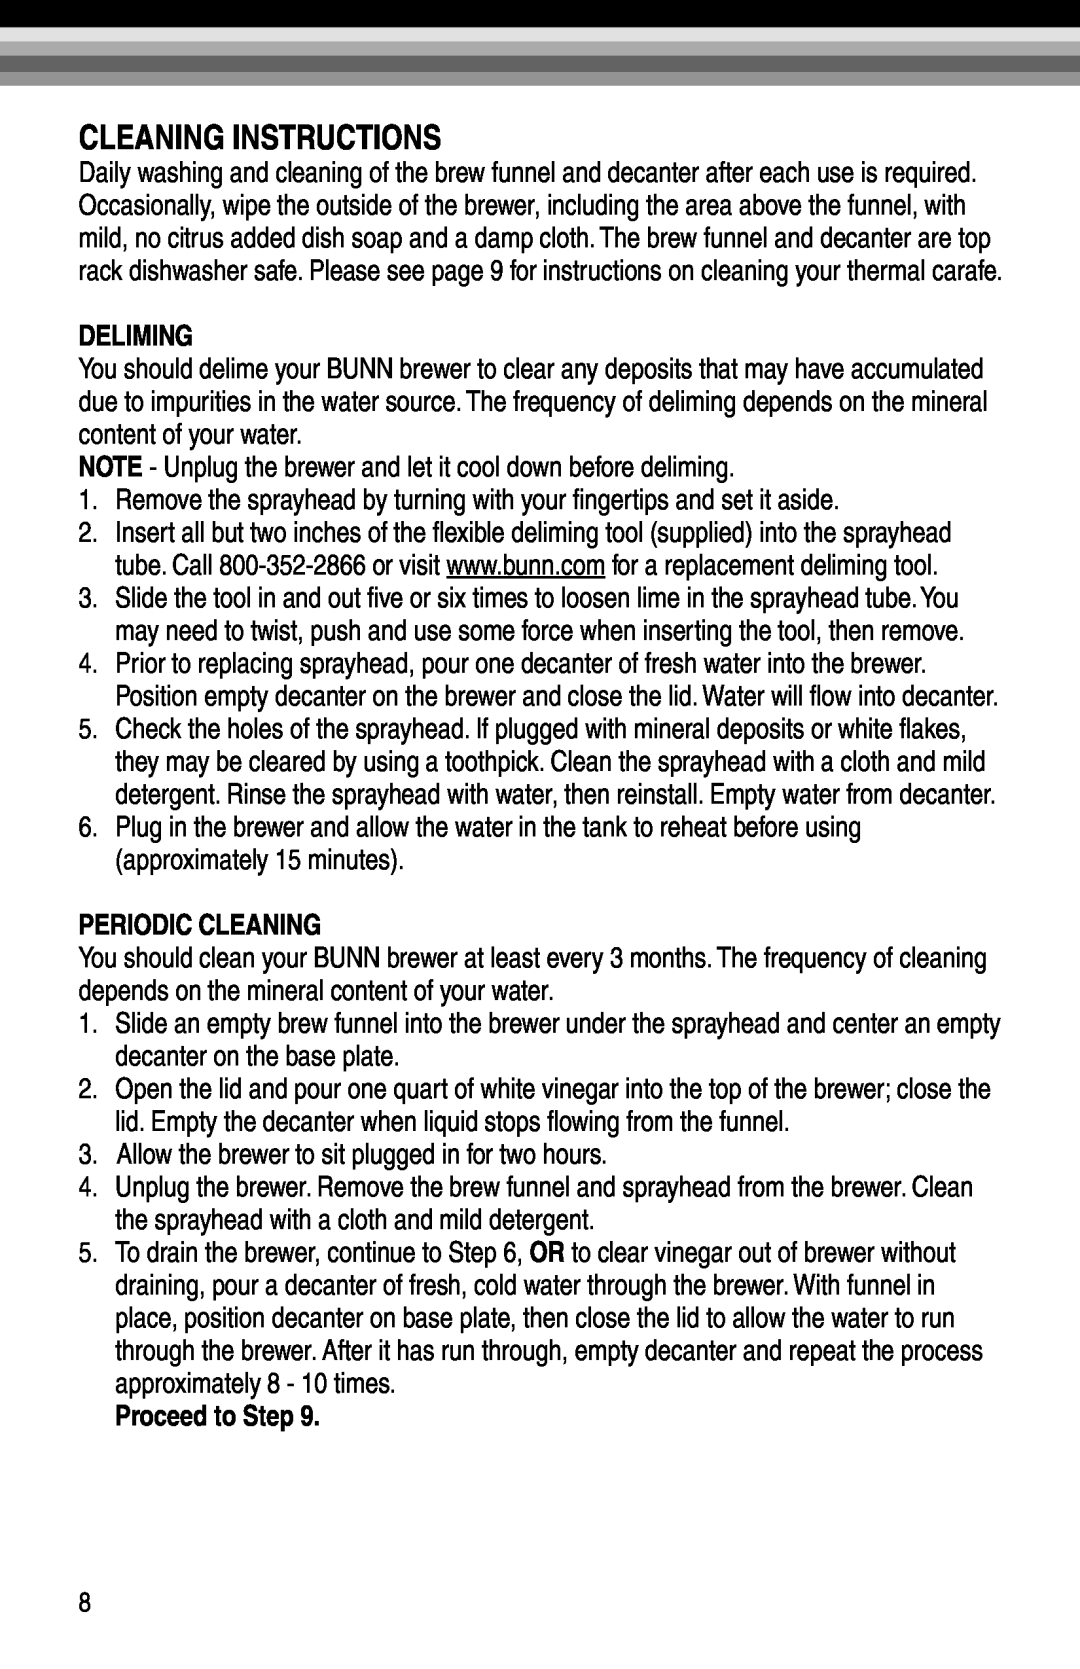 Bunn NHBX-W, NHBX-B manual Cleaning Instructions, Deliming, Periodic Cleaning, Proceed to Step 